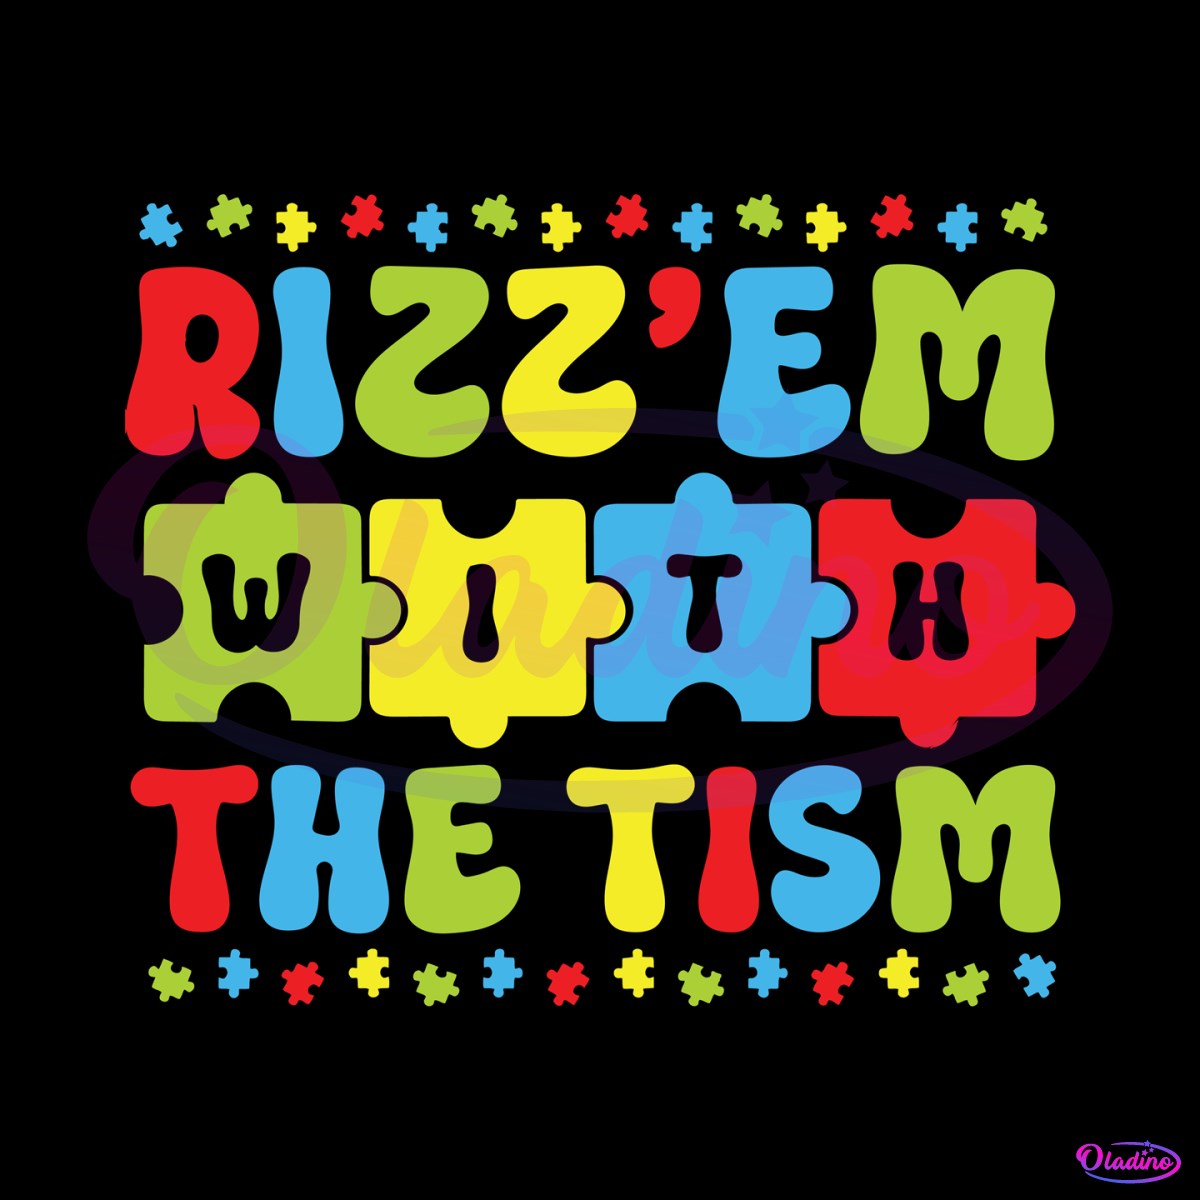 rizz-em-with-the-tism-puzzle-pieces-svg